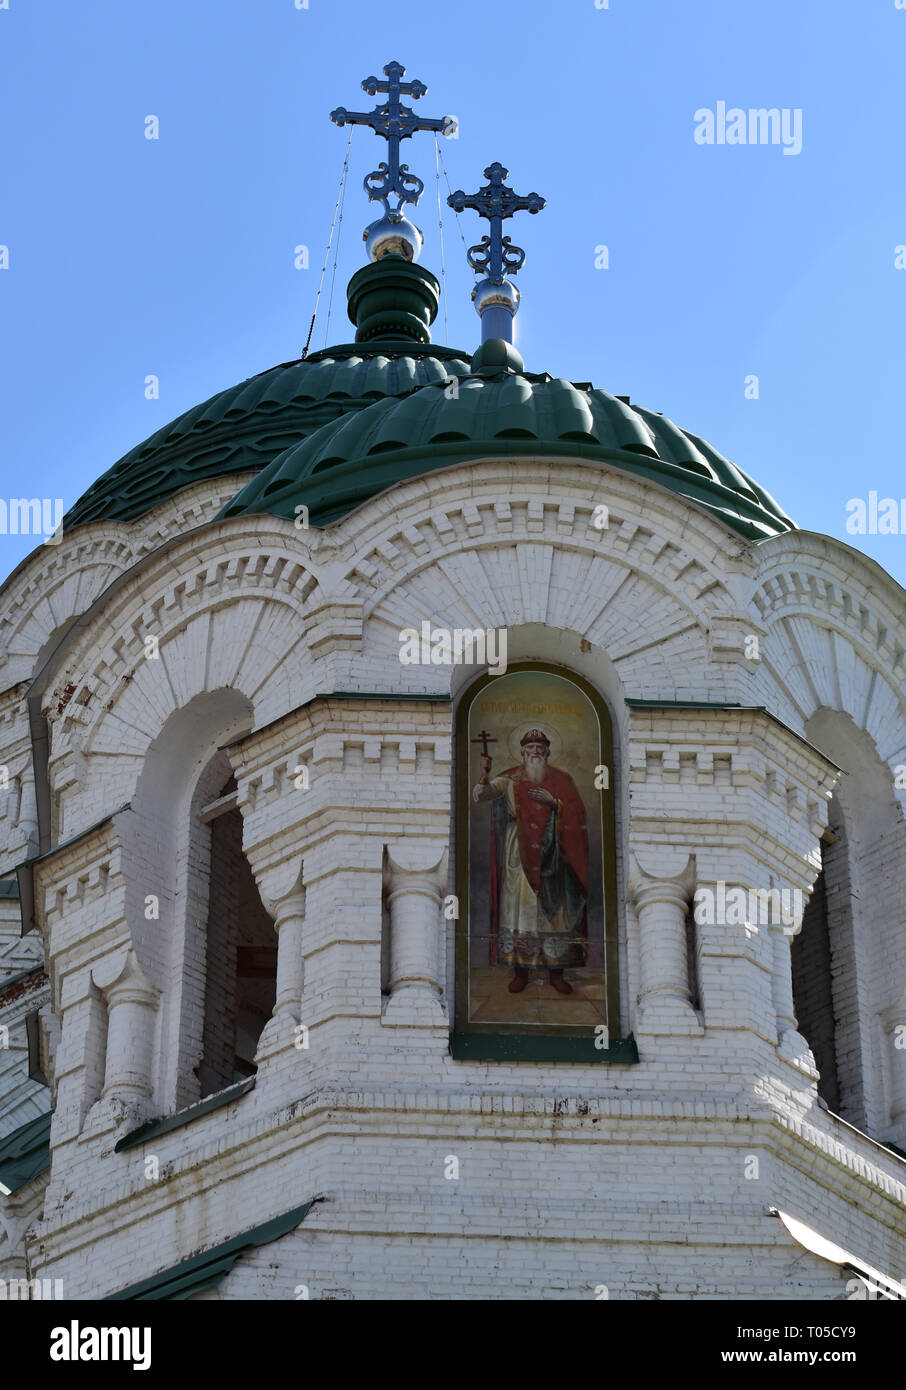 Old Russian St. Vladimir's Church in Byzantine style in Astrakhan, Russia Stock Photo